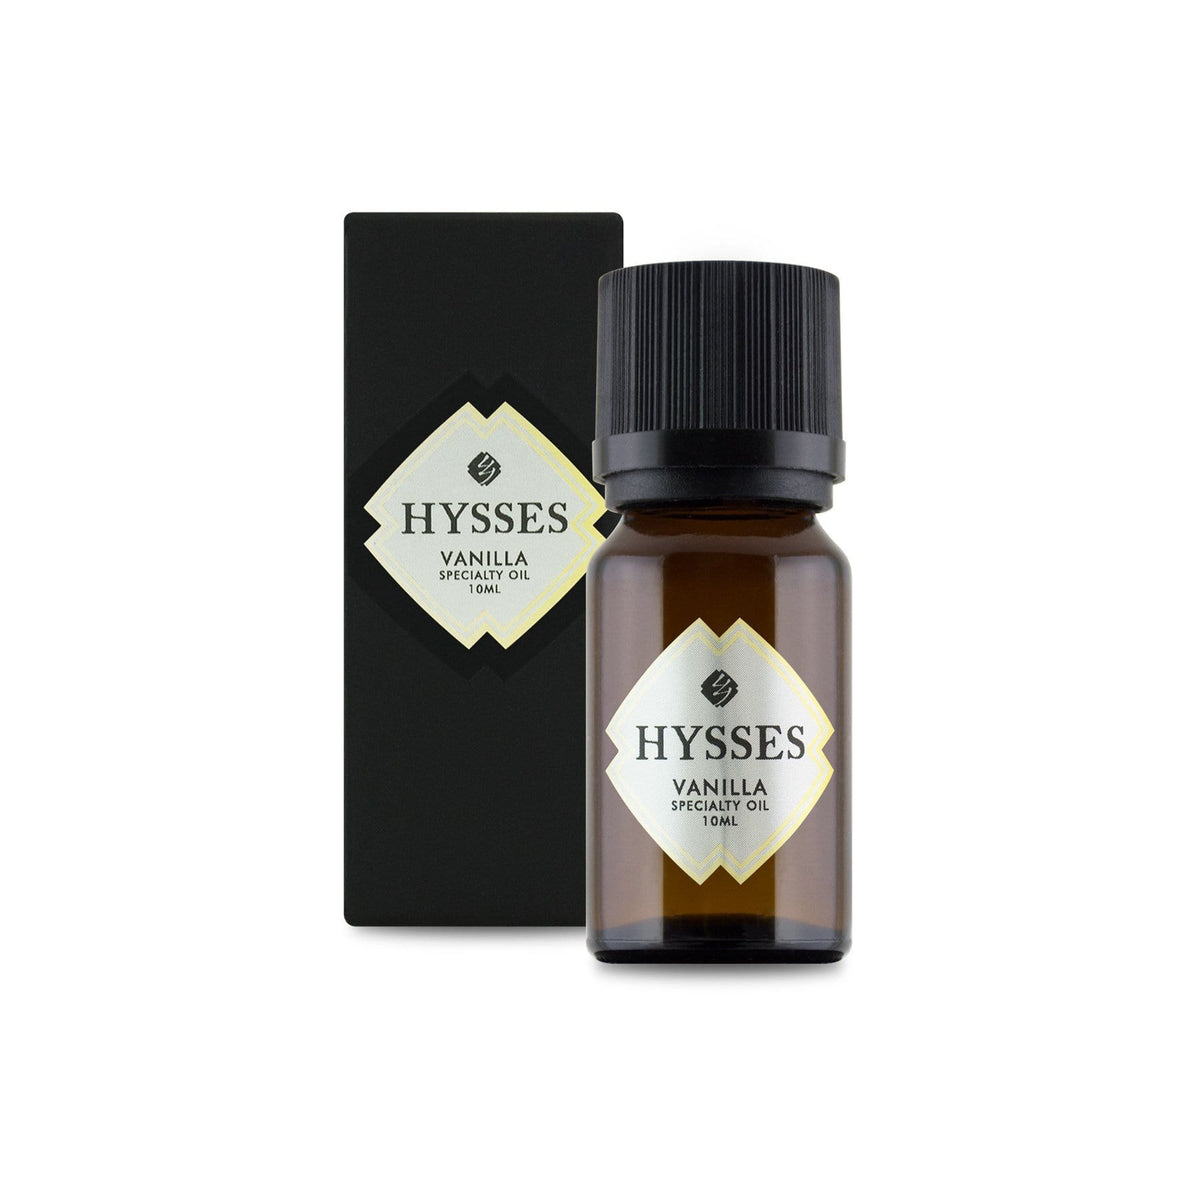 Hysses Essential Oil Ethanol / 10ml Specialty Oil Vanilla Absolute (30%)